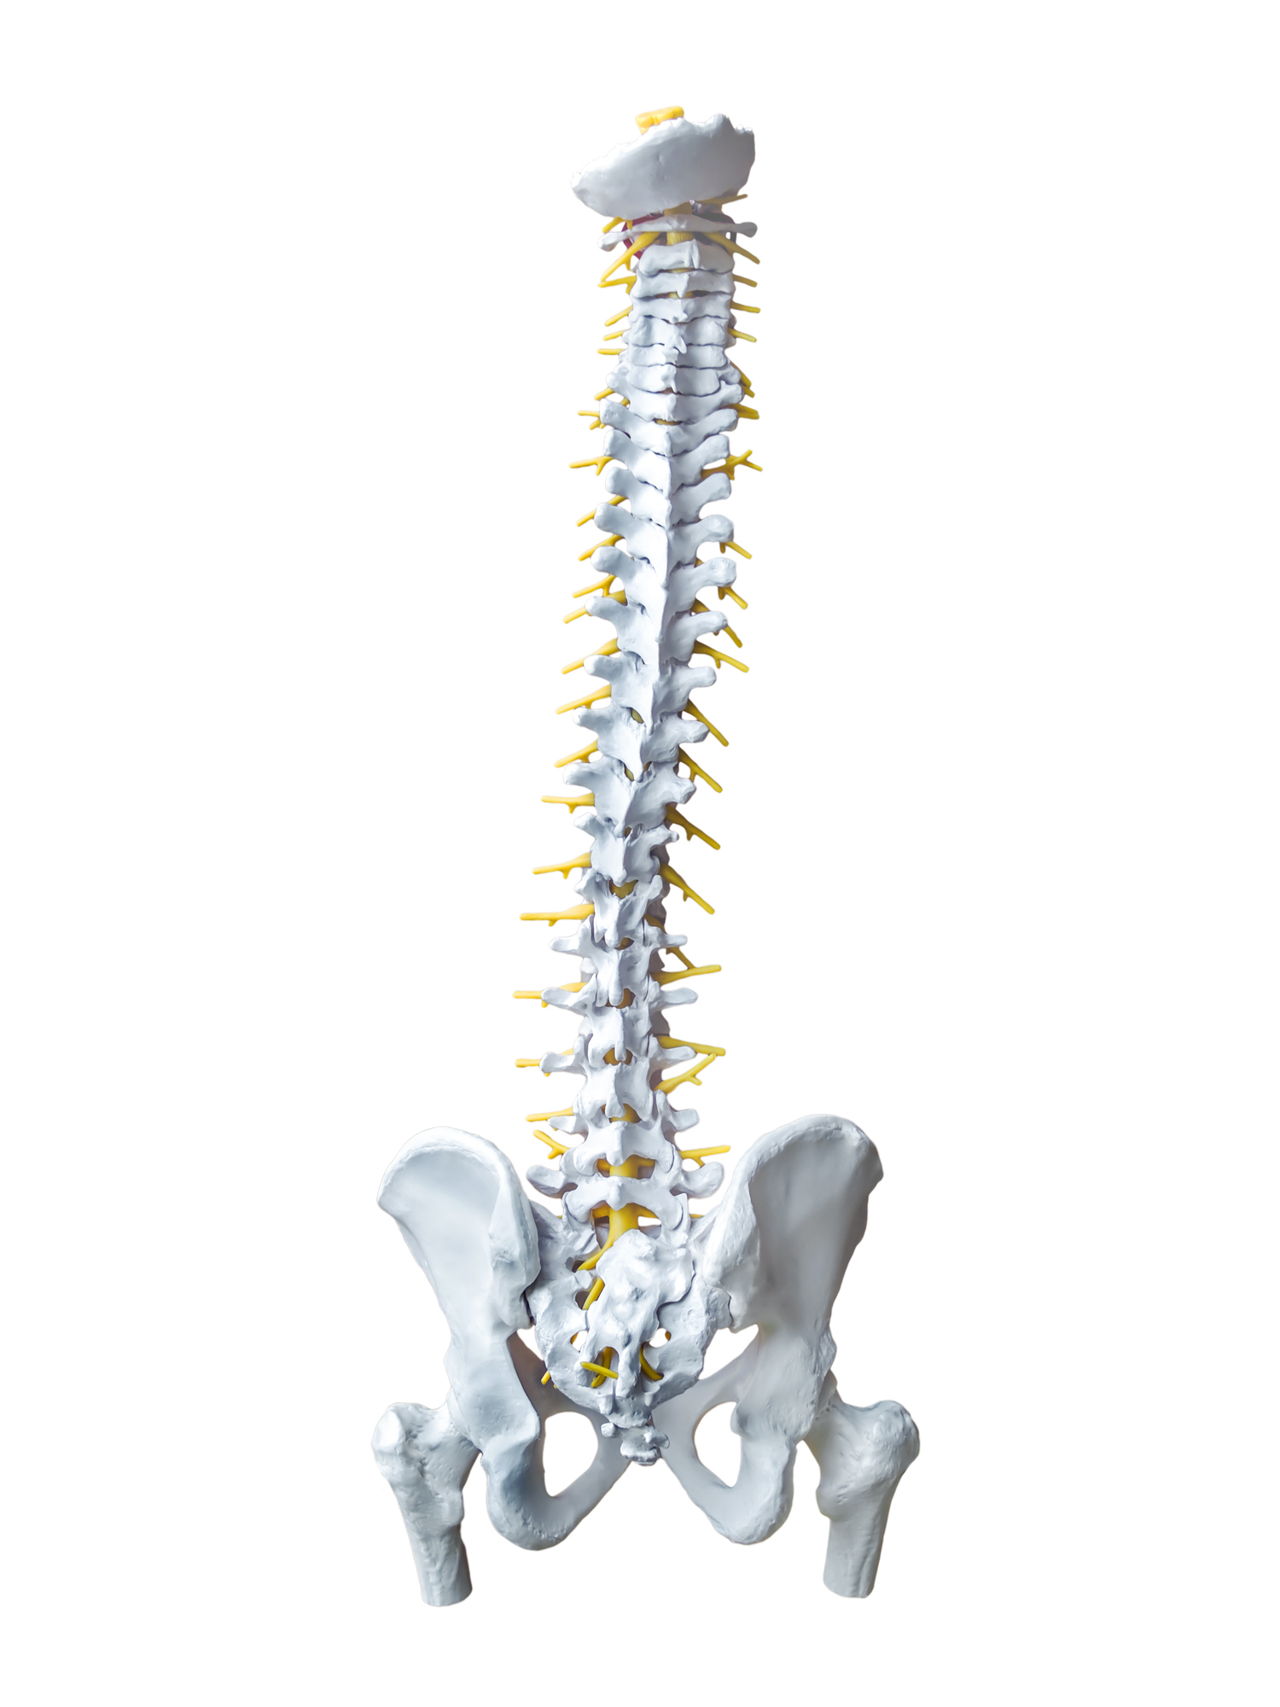 How Many Bones Make Up The Back Bone : Conditions and Treatments - The